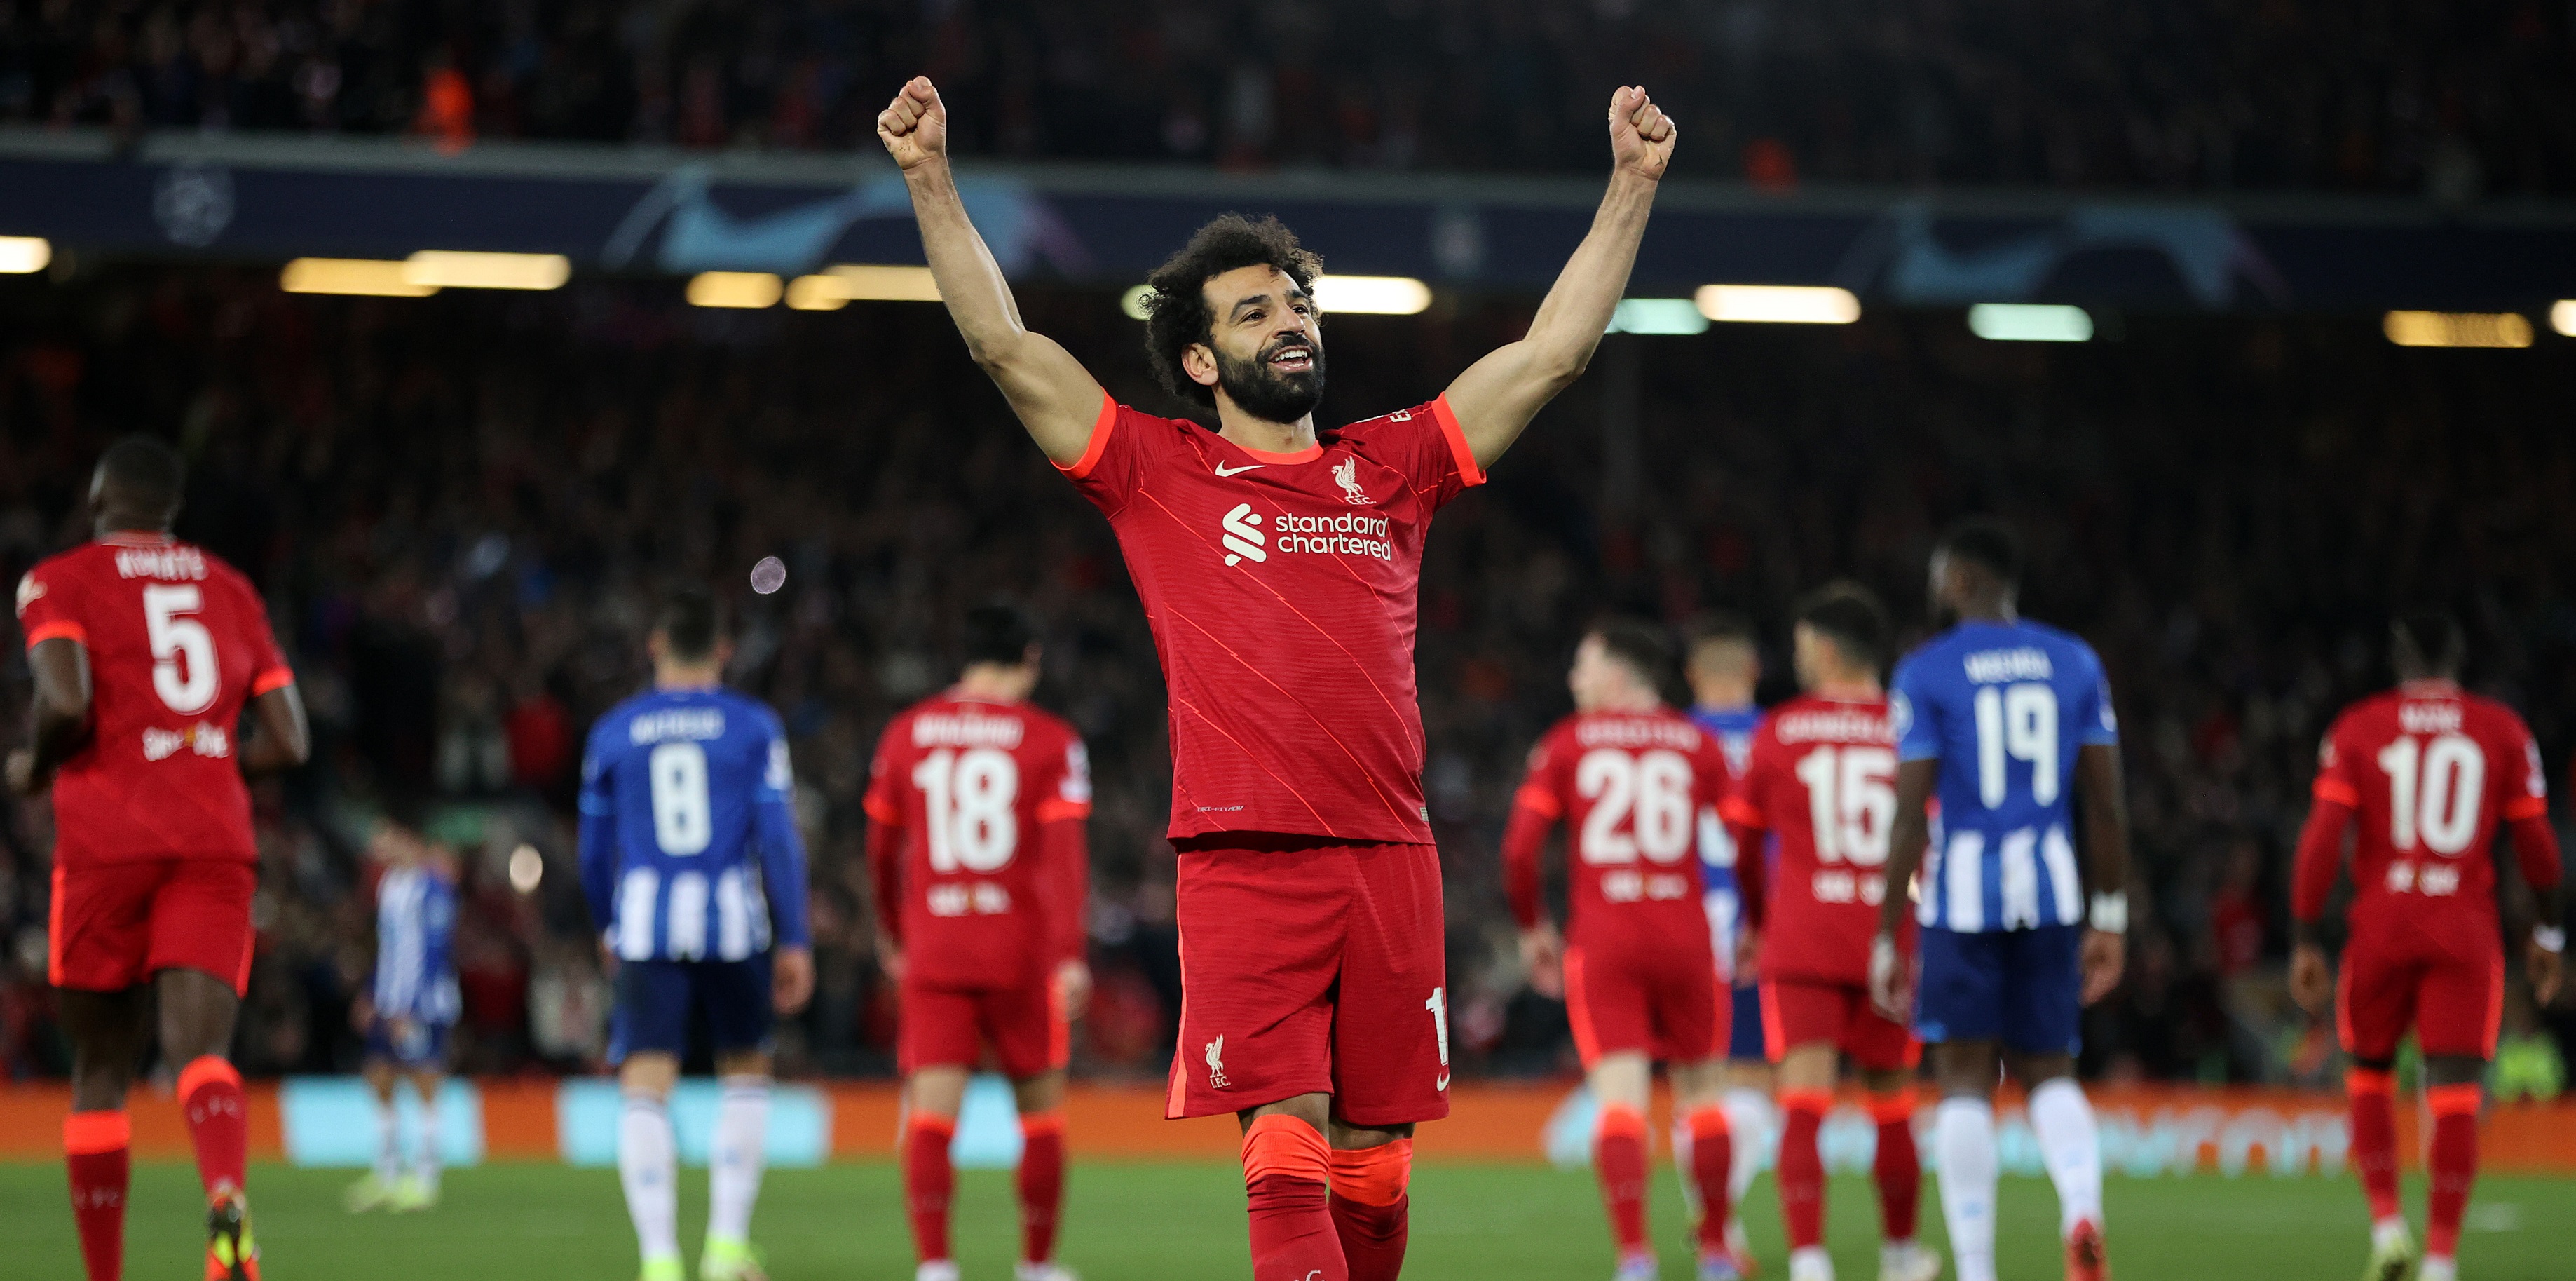 ‘Where would he go?’ – Former Premier League striker backs Mo Salah to sign new Liverpool contract